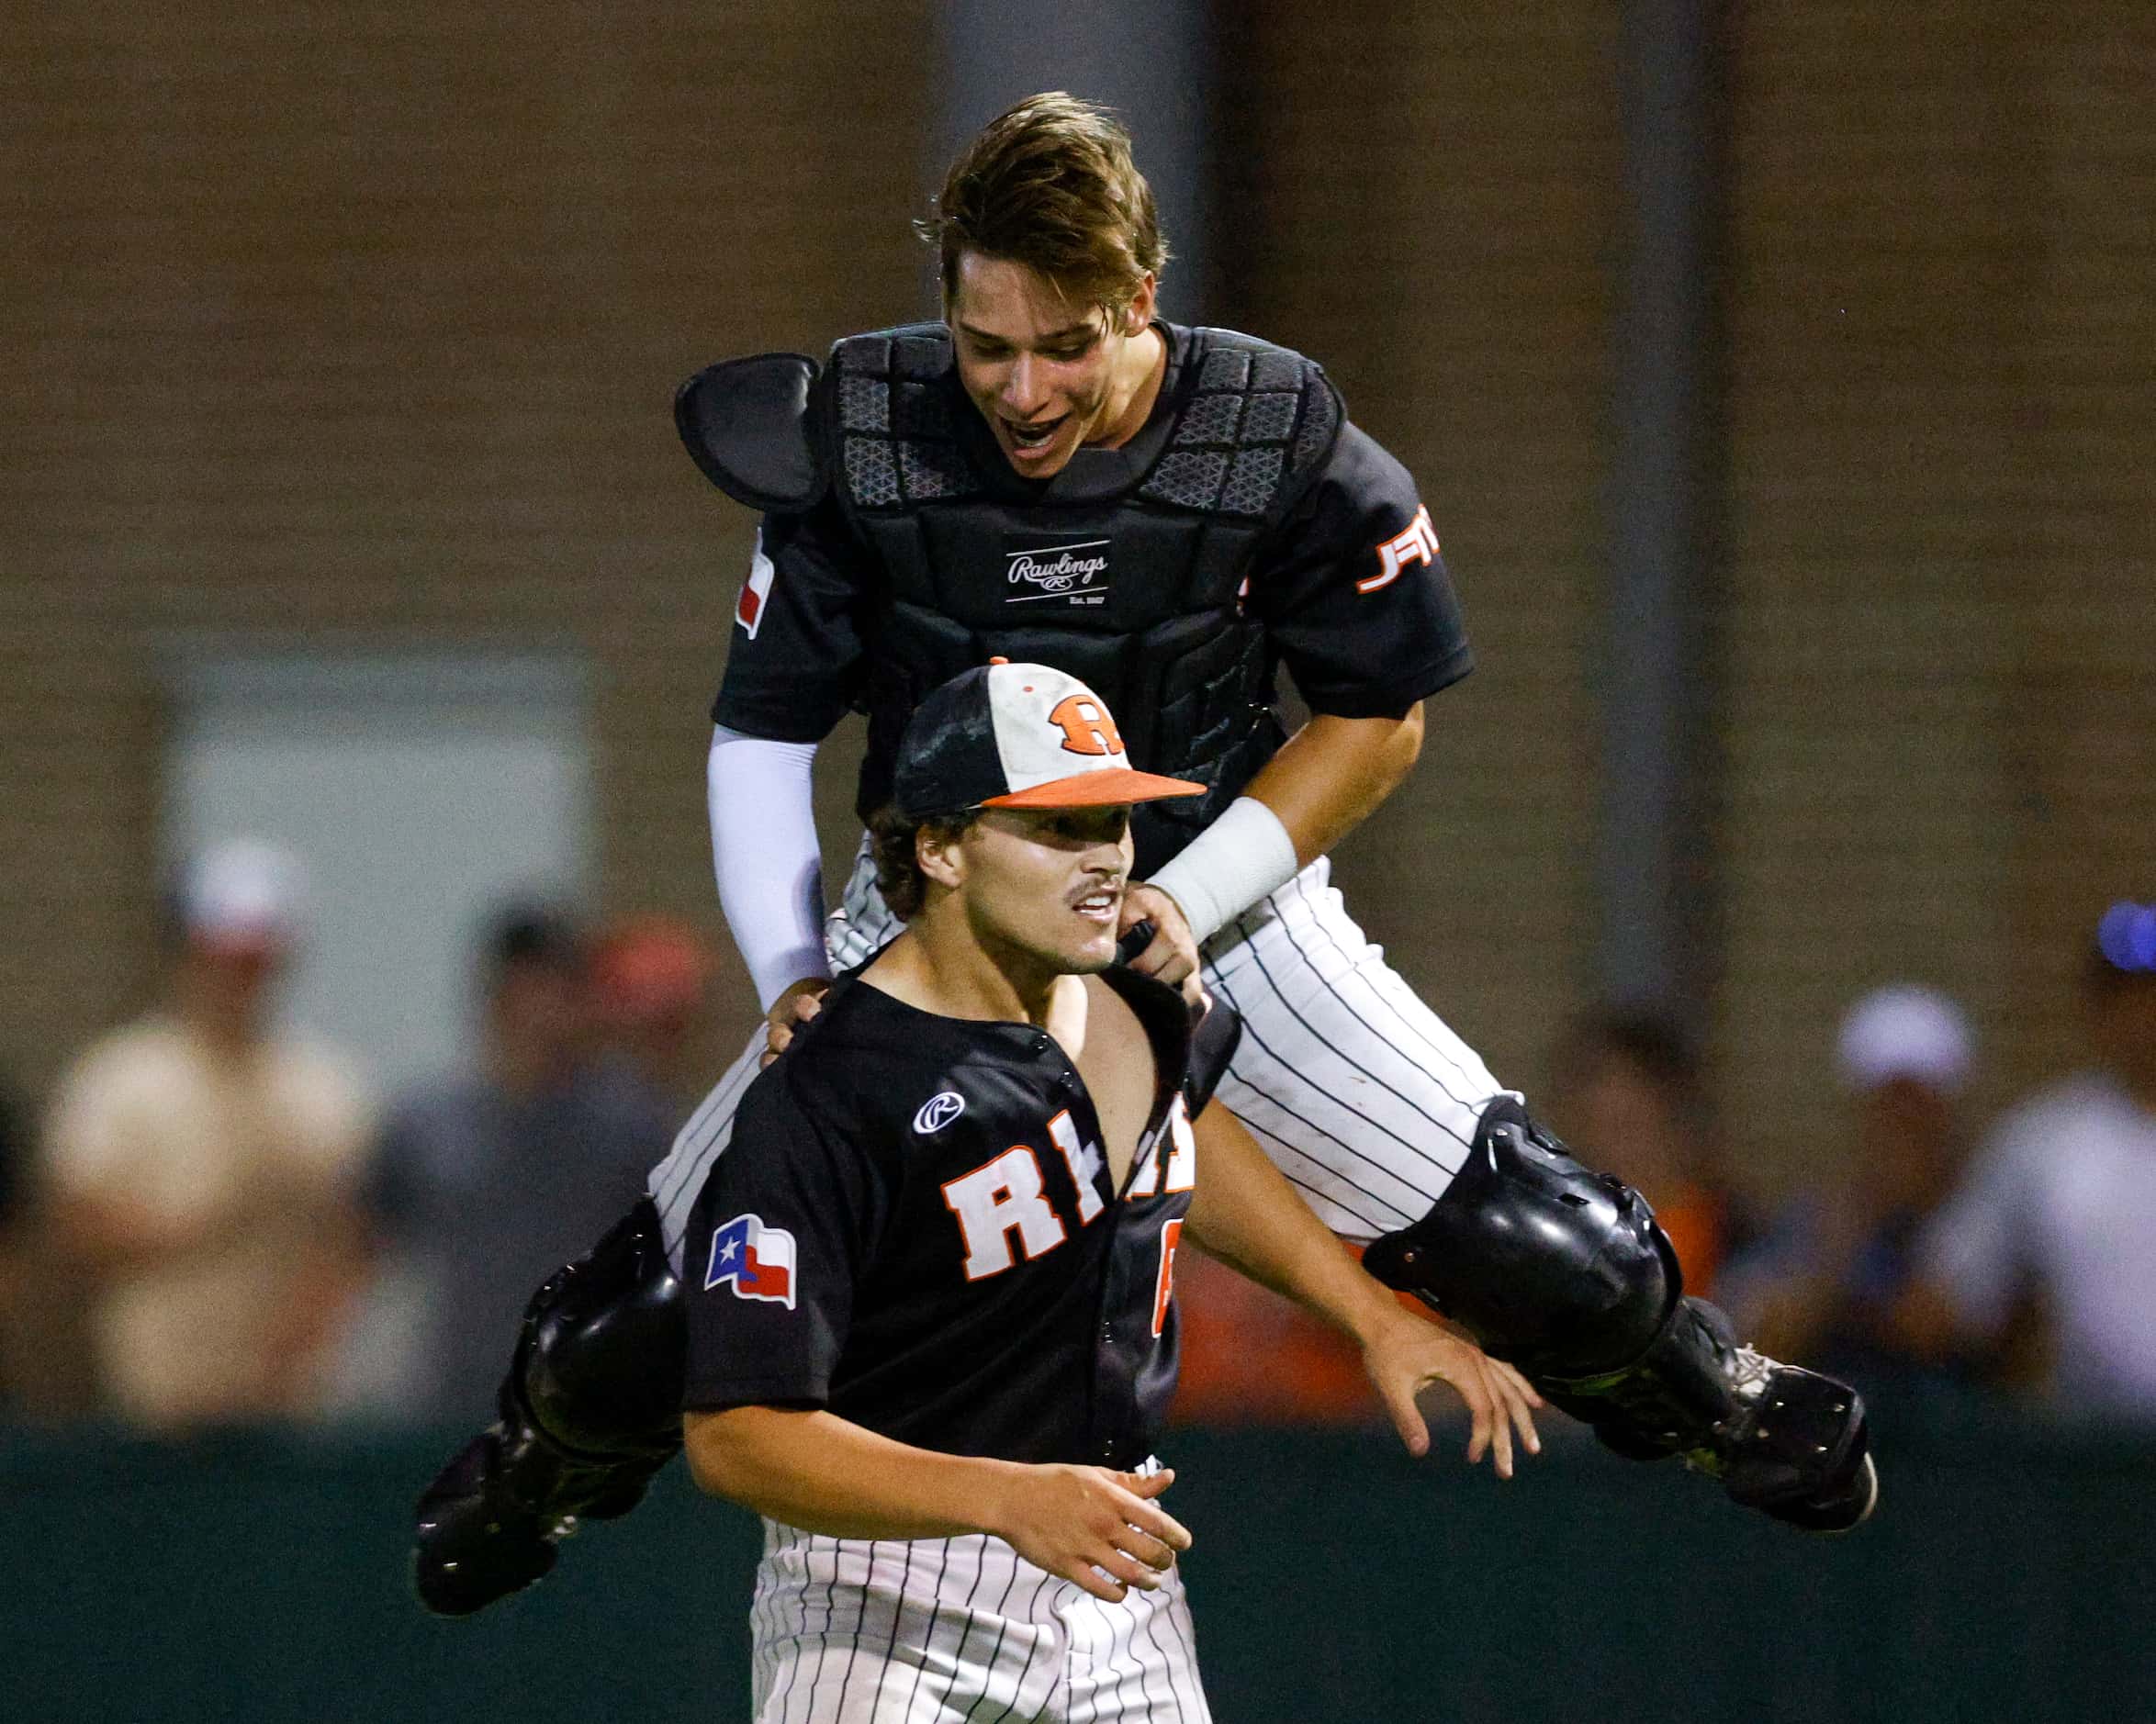 Rockwall catcher Jake Overstreet (11) celebrates with pitcher Mac Rose (6) after winning a...